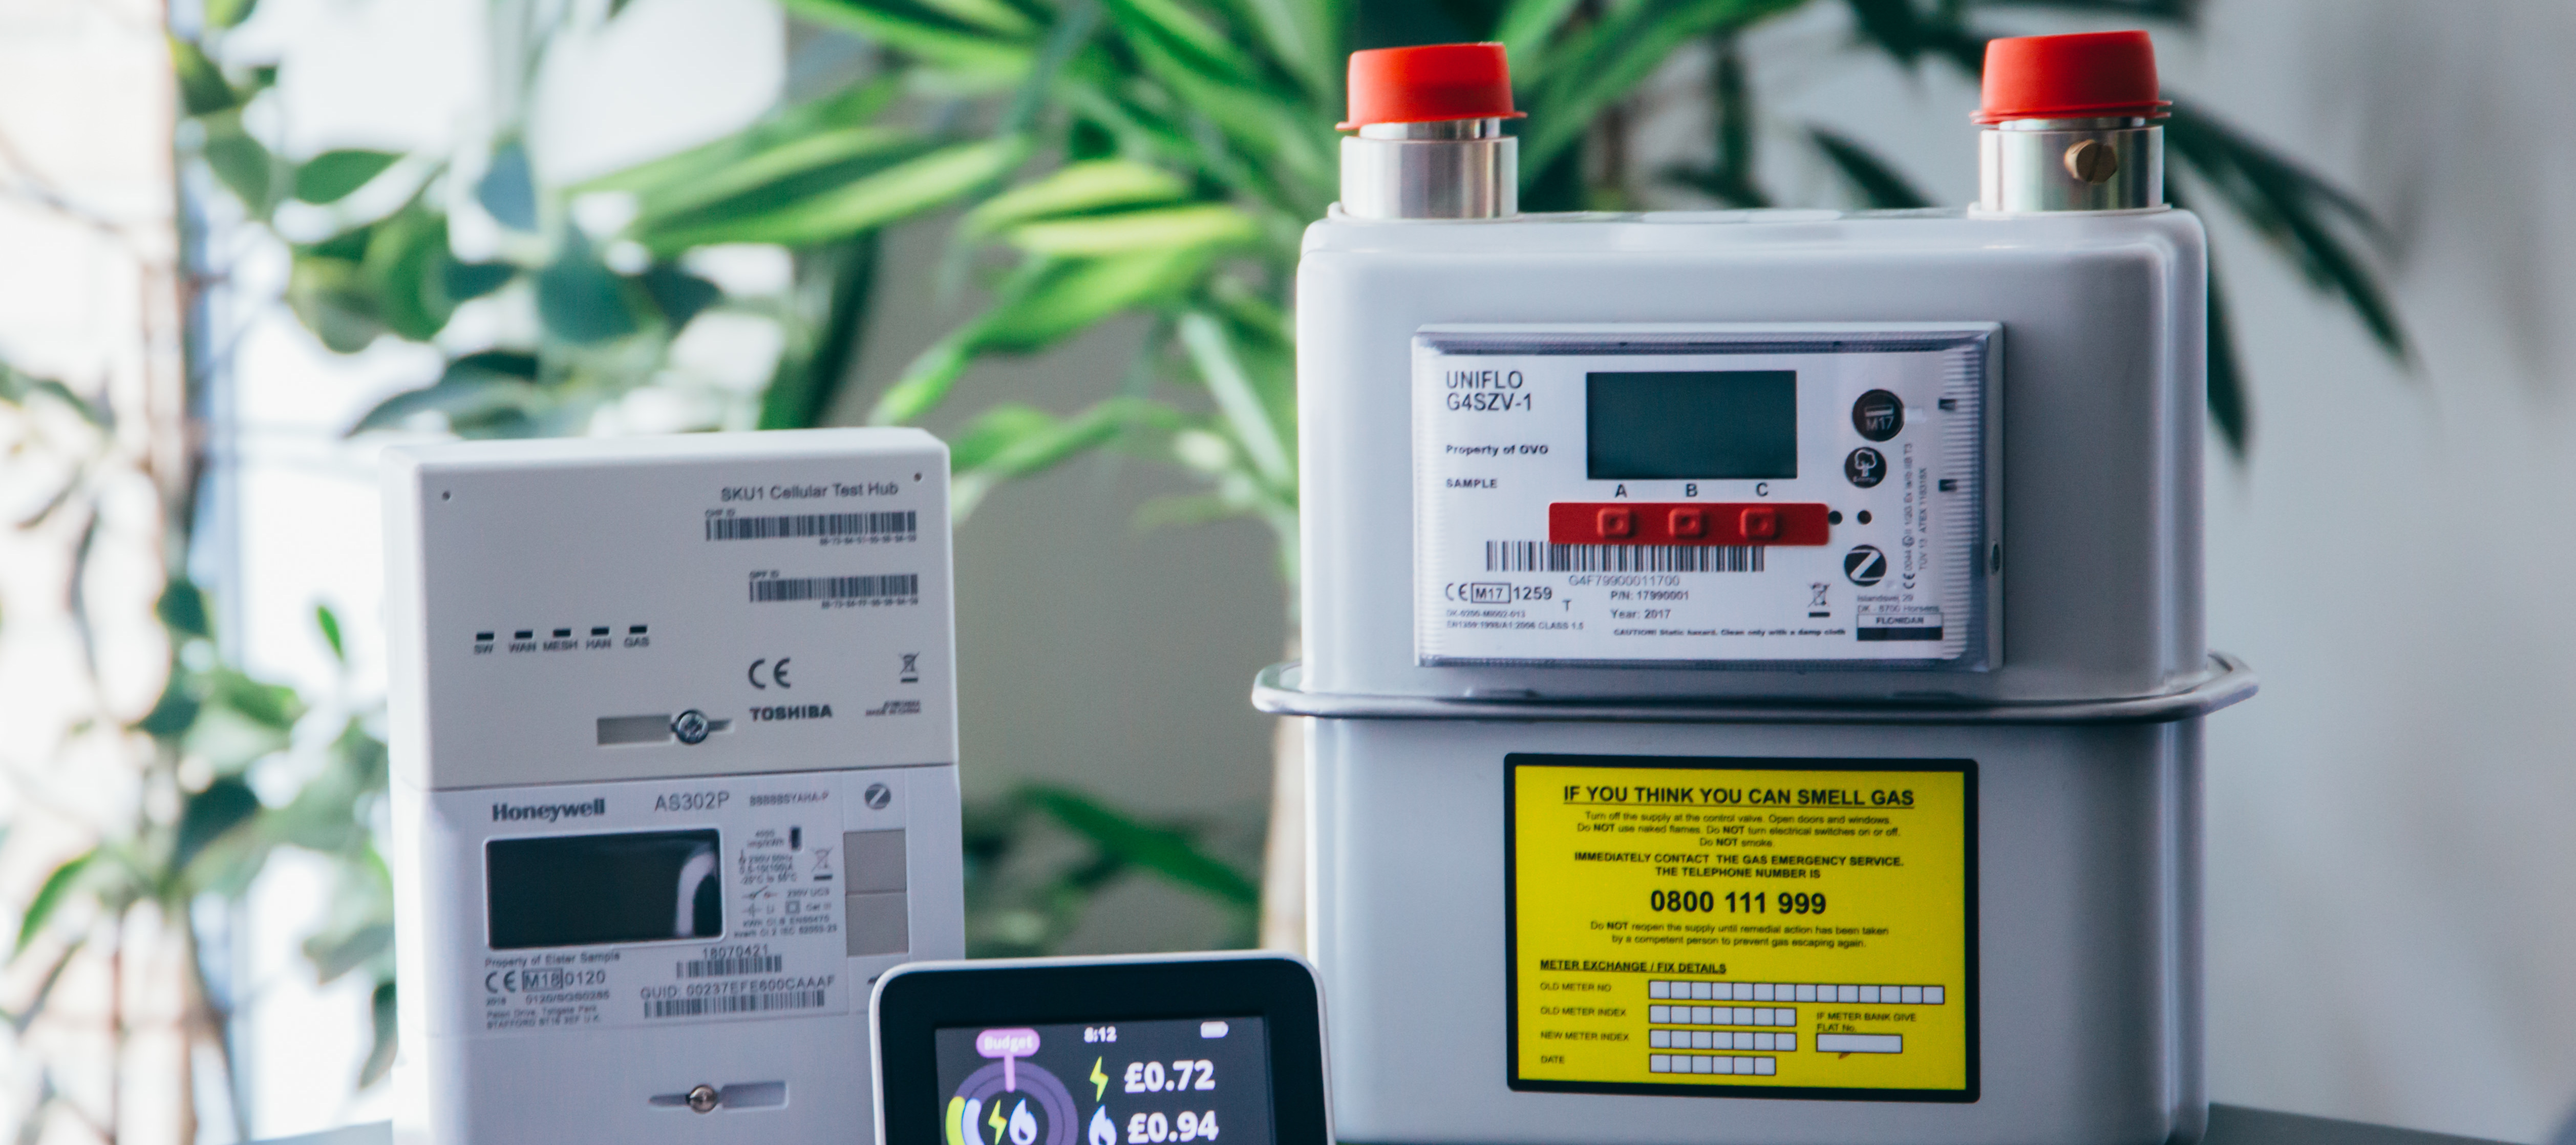 Identifying Smart Meter Issues on your online account or OVO app